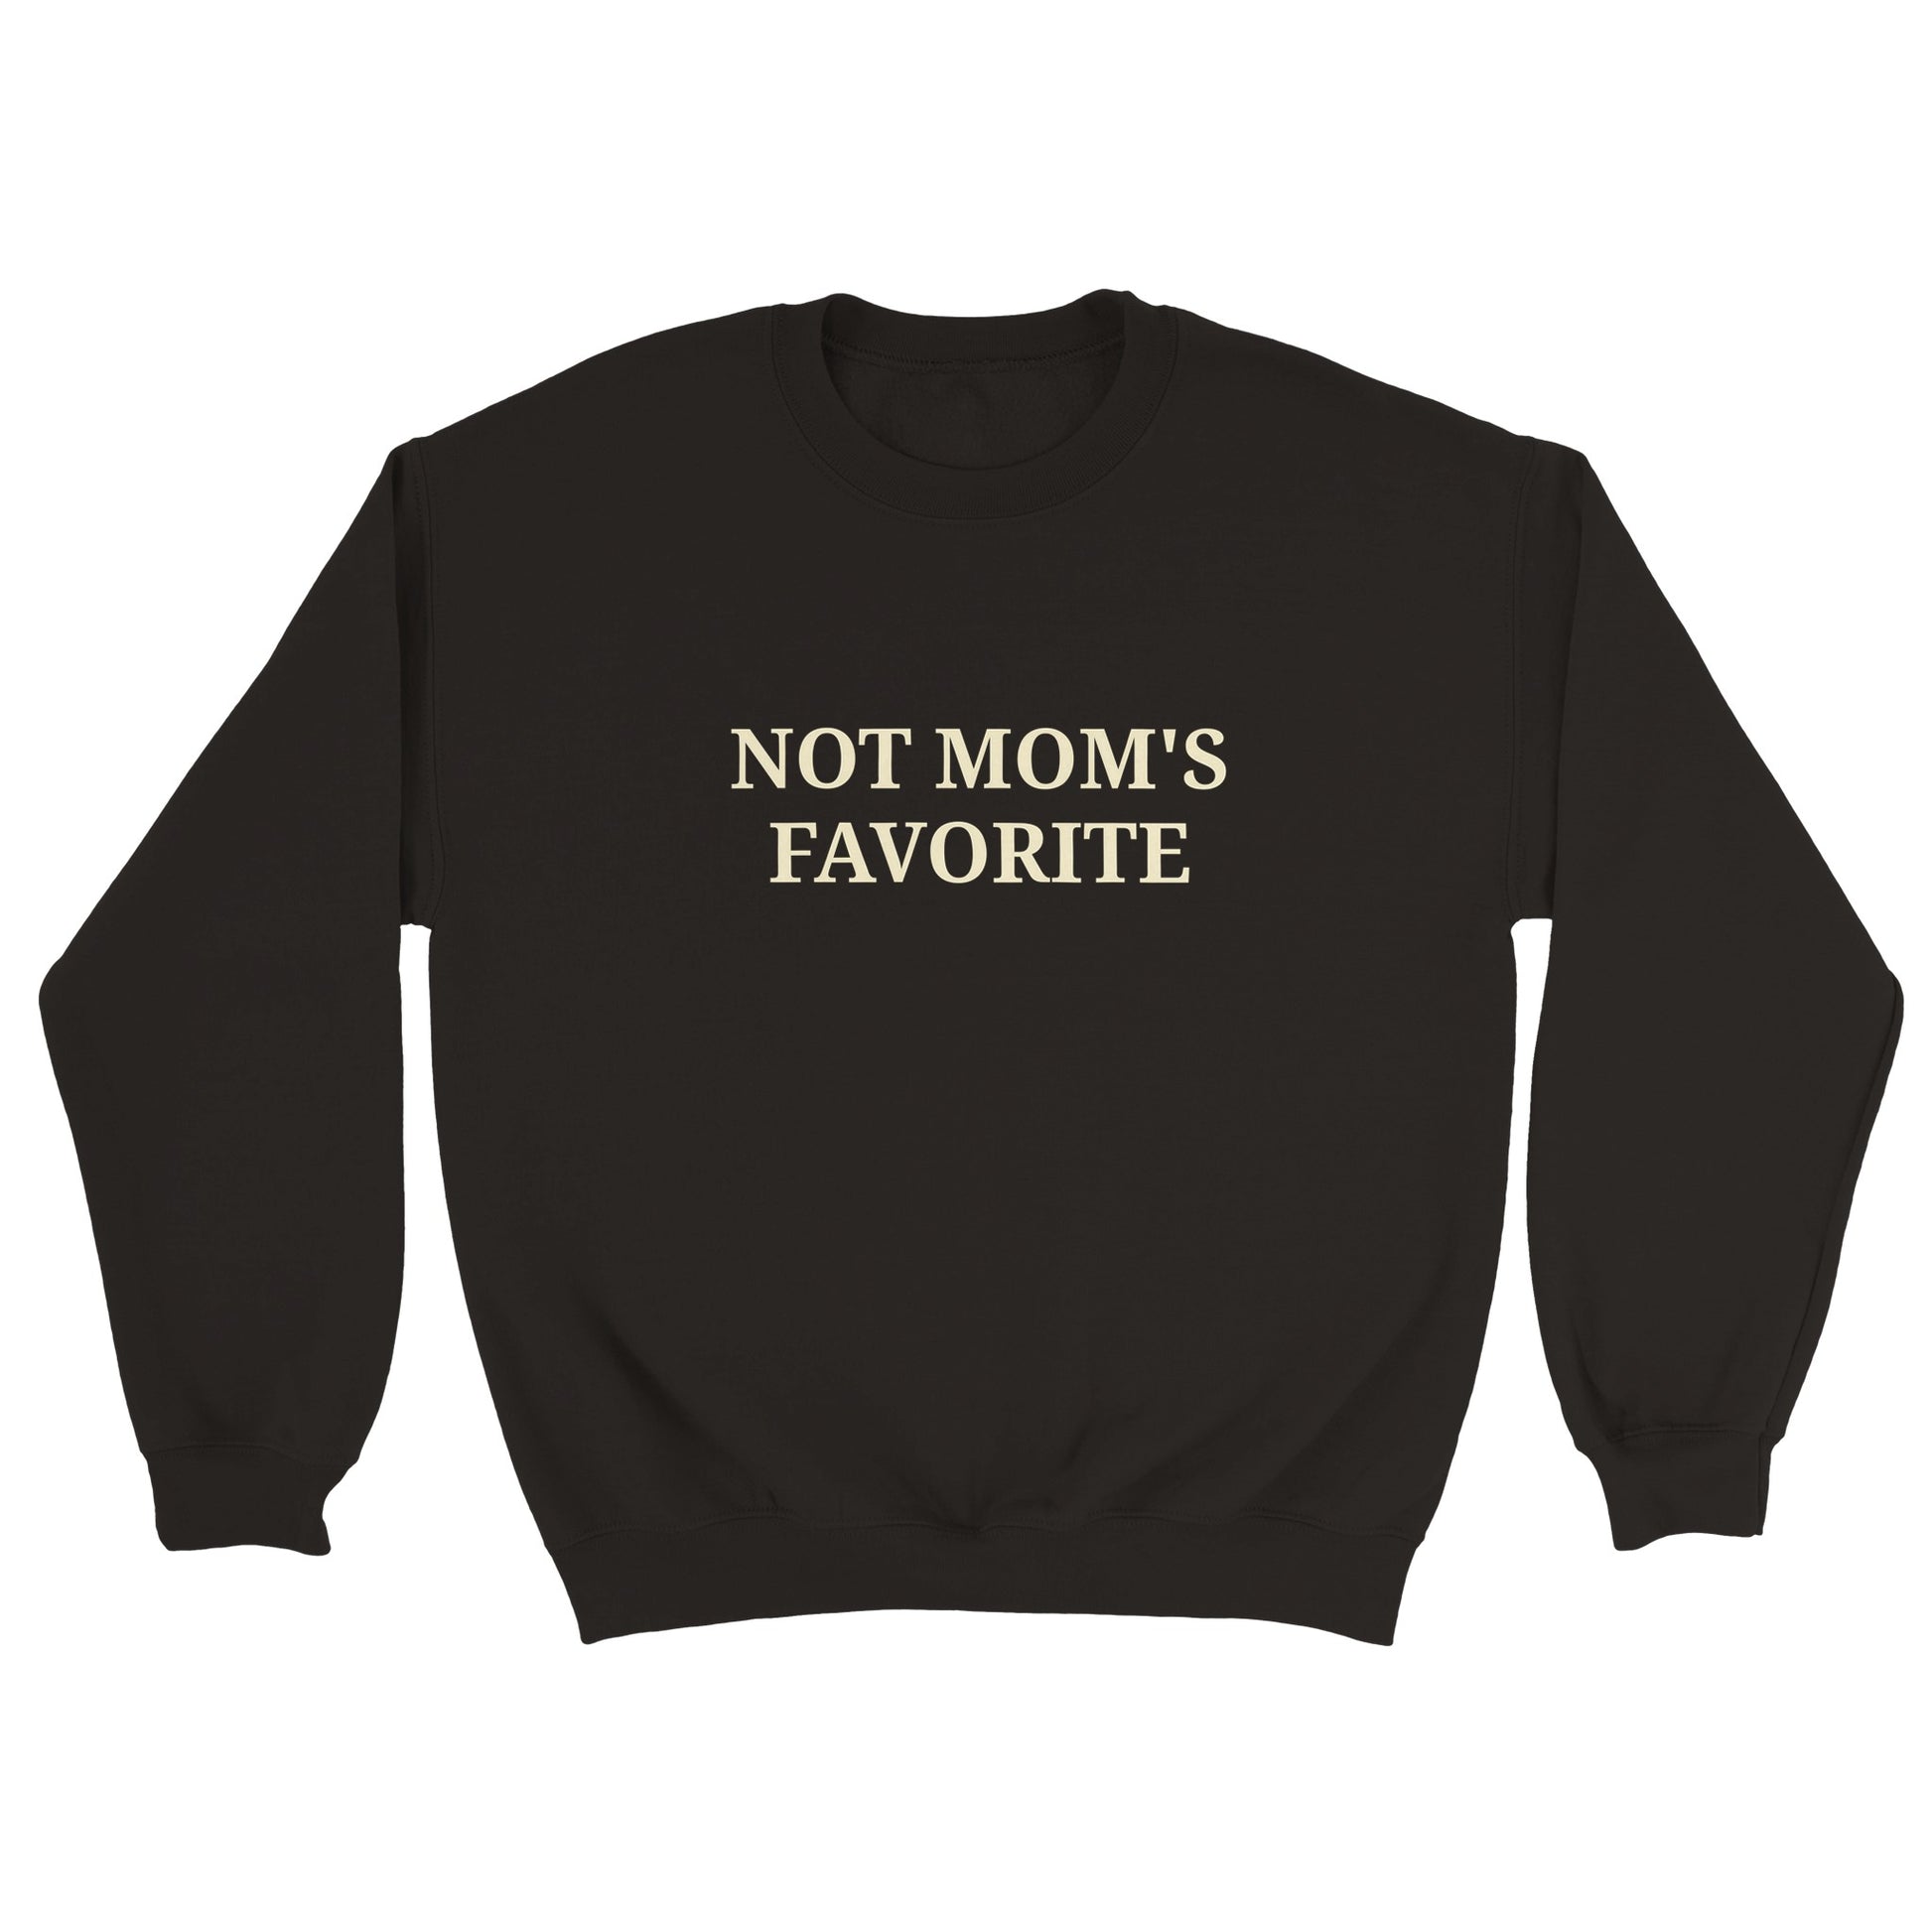 a black sweatshirt with "Not mom's favorite" written across the chest